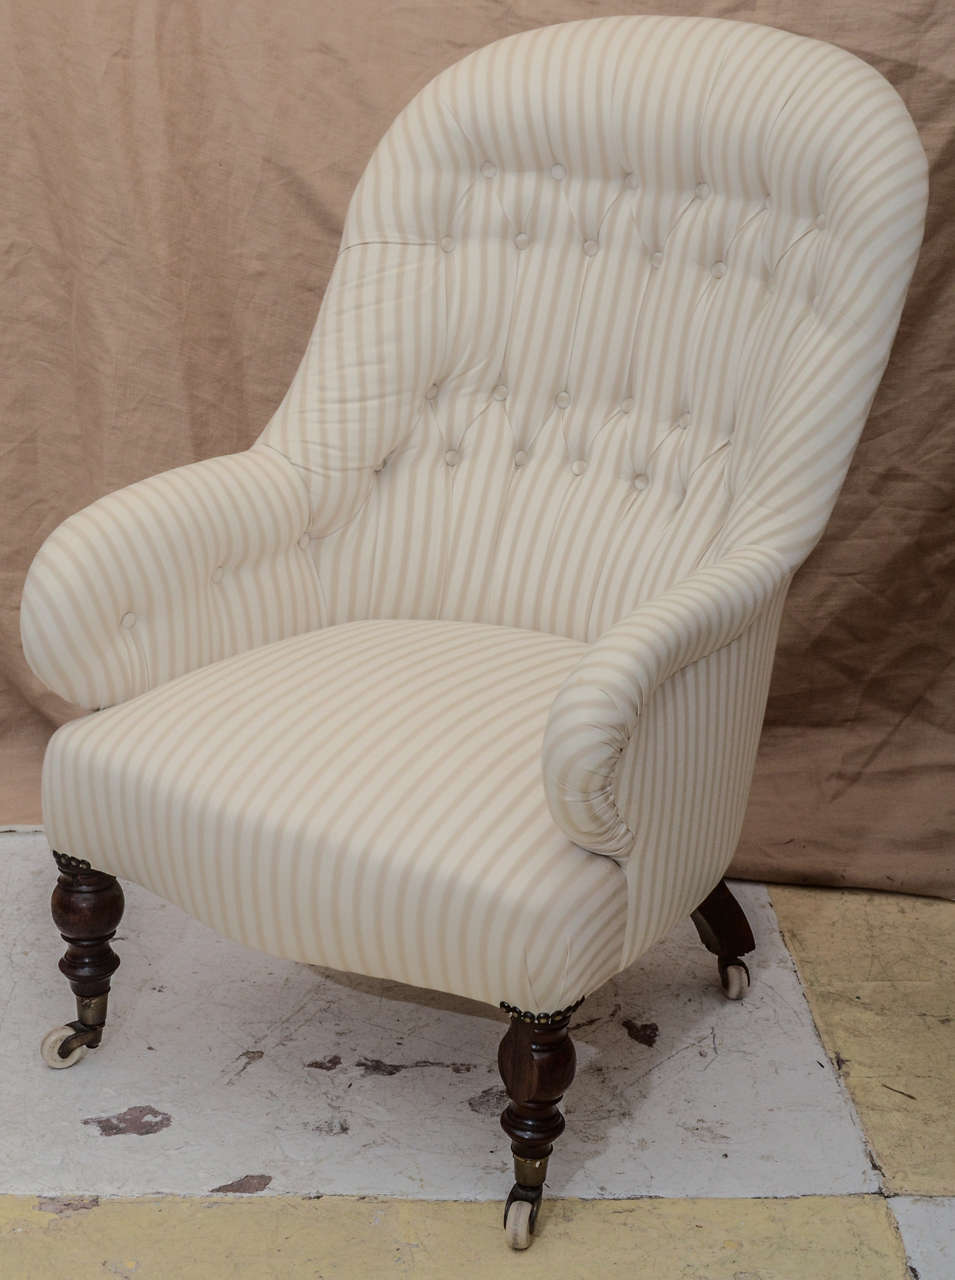 BEAUTIFULLY SCALED TURKISH FRAME TUFTED ARM & BACH UPHOLSTERED CHAIR WITH ROSEWOOD LEGS ON CASTORS-- COVERED IN IAN MAKIN TICKING #2 (CREAM) VERY COMFORTABLE